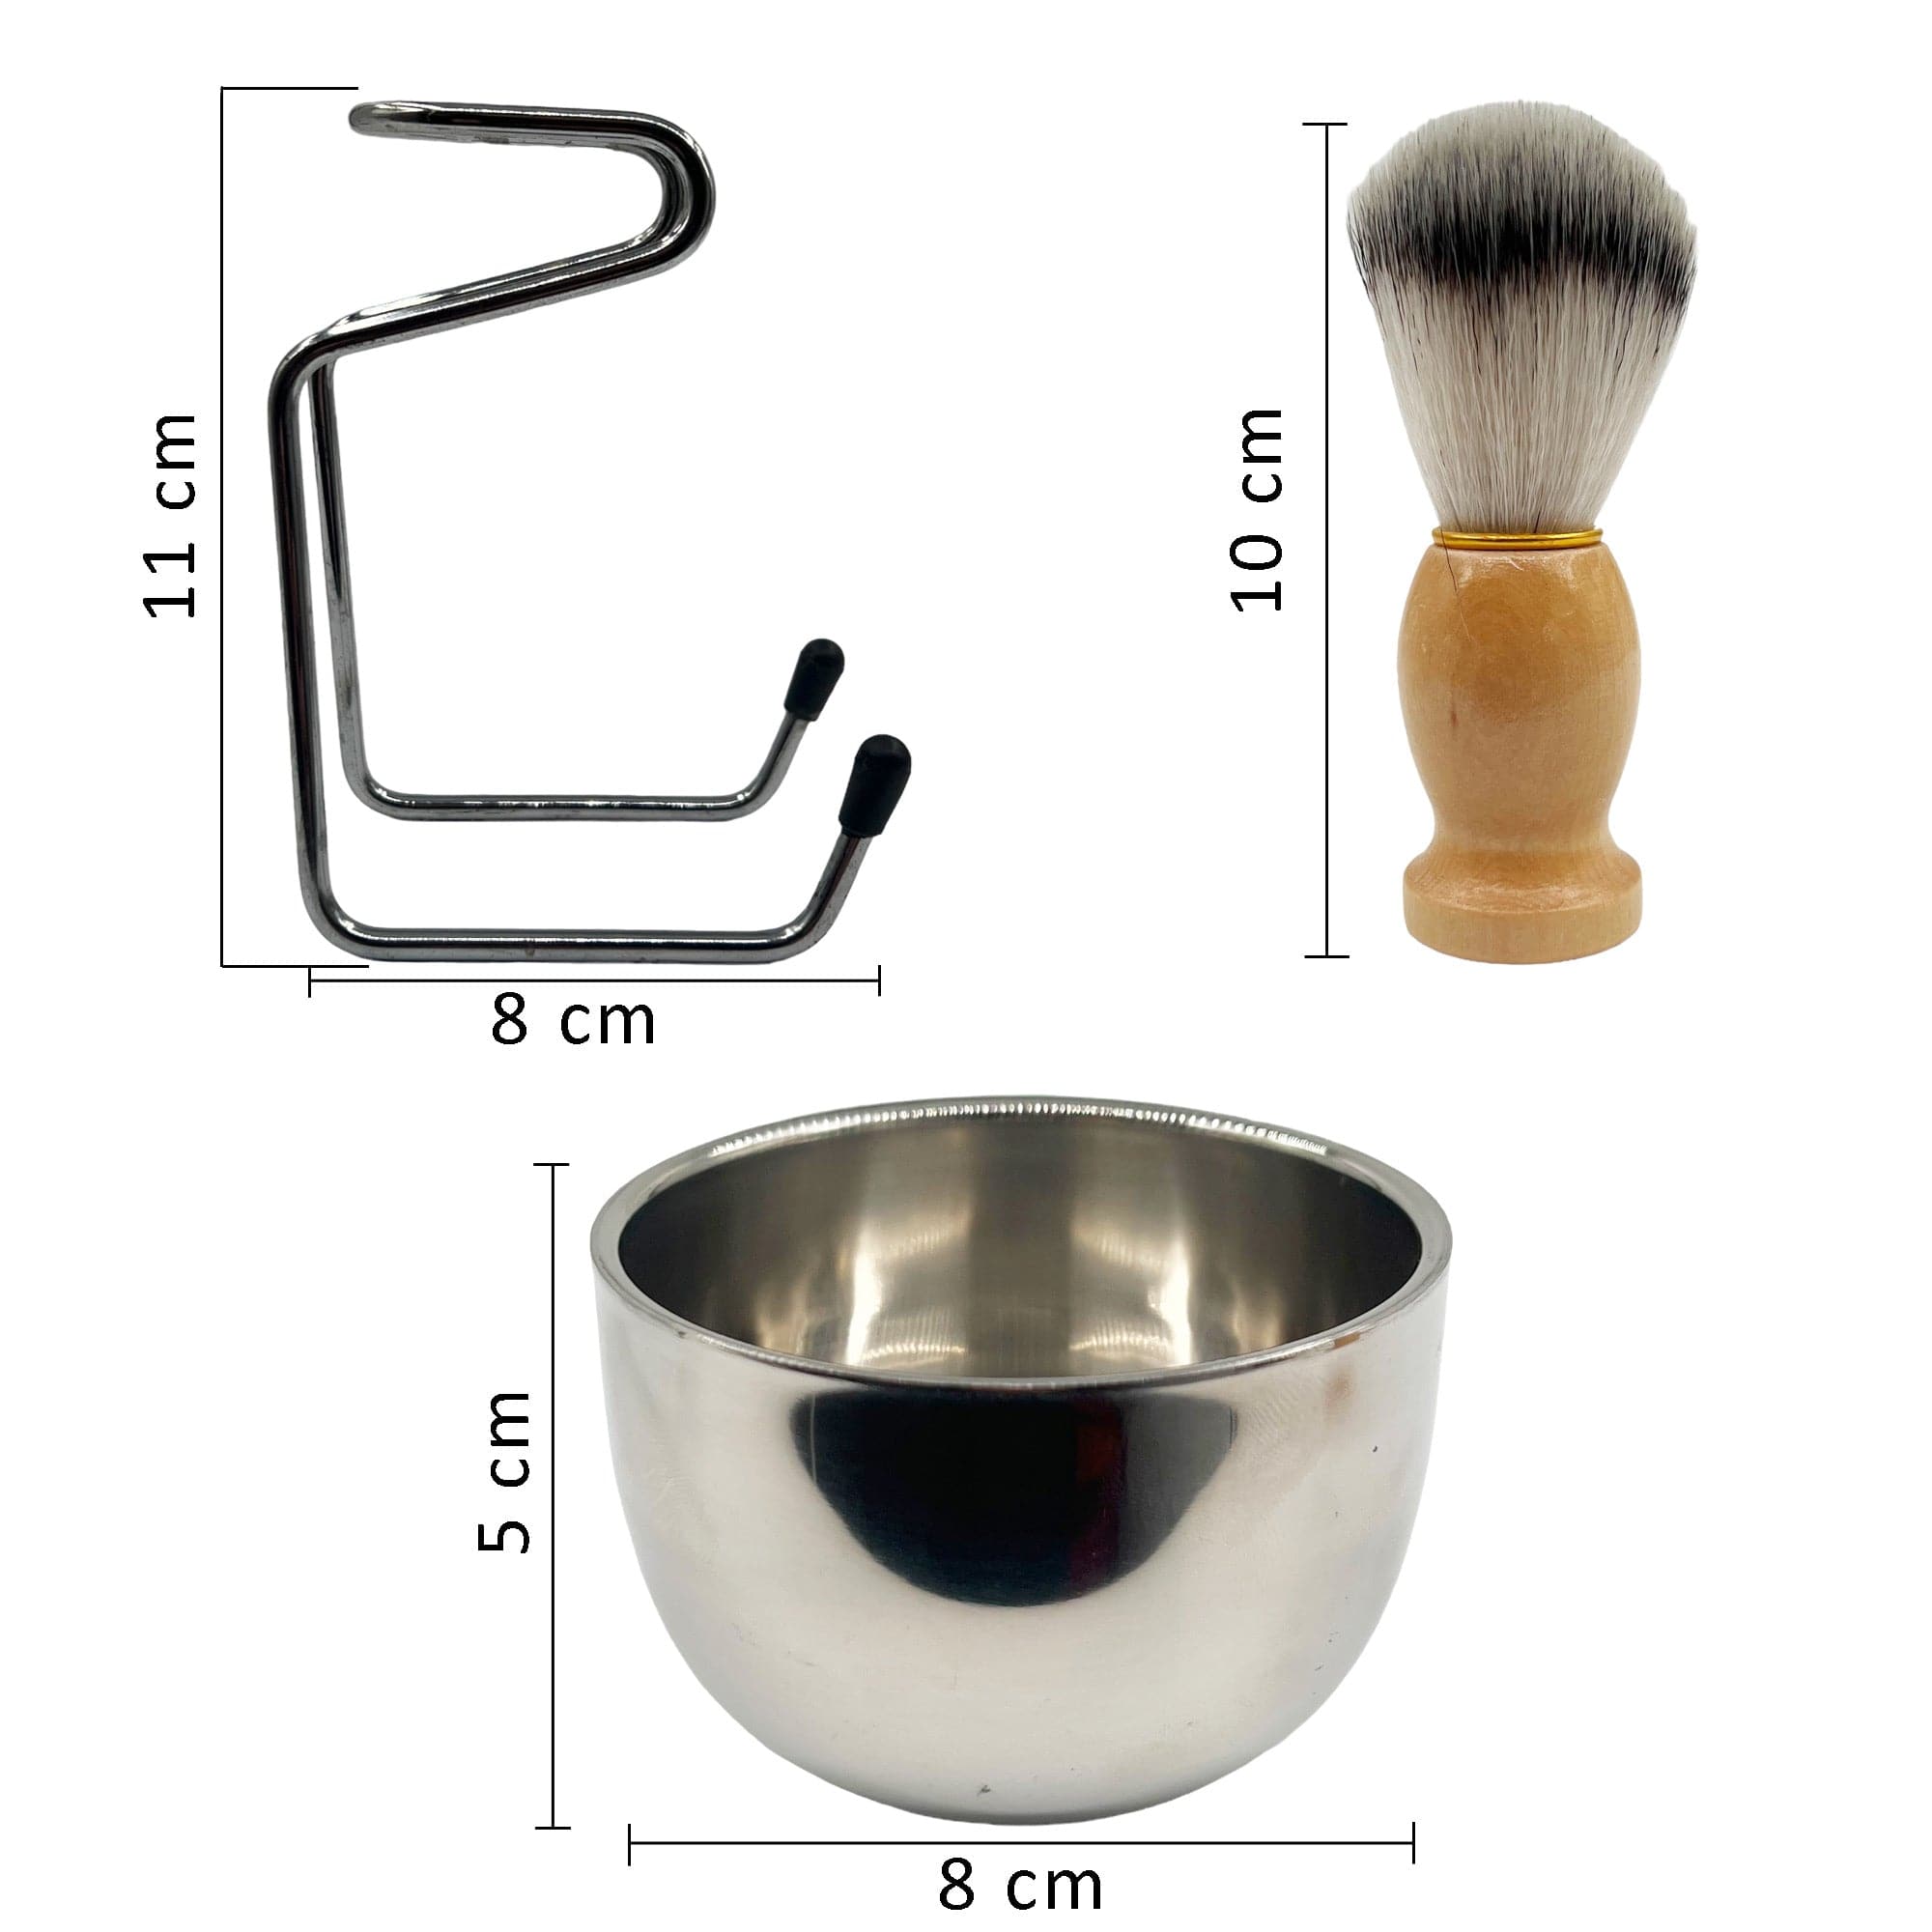 Eson - Shaving Bowl And Brush Sets Stainless Steel Bowl & Wooden Brush With Stand